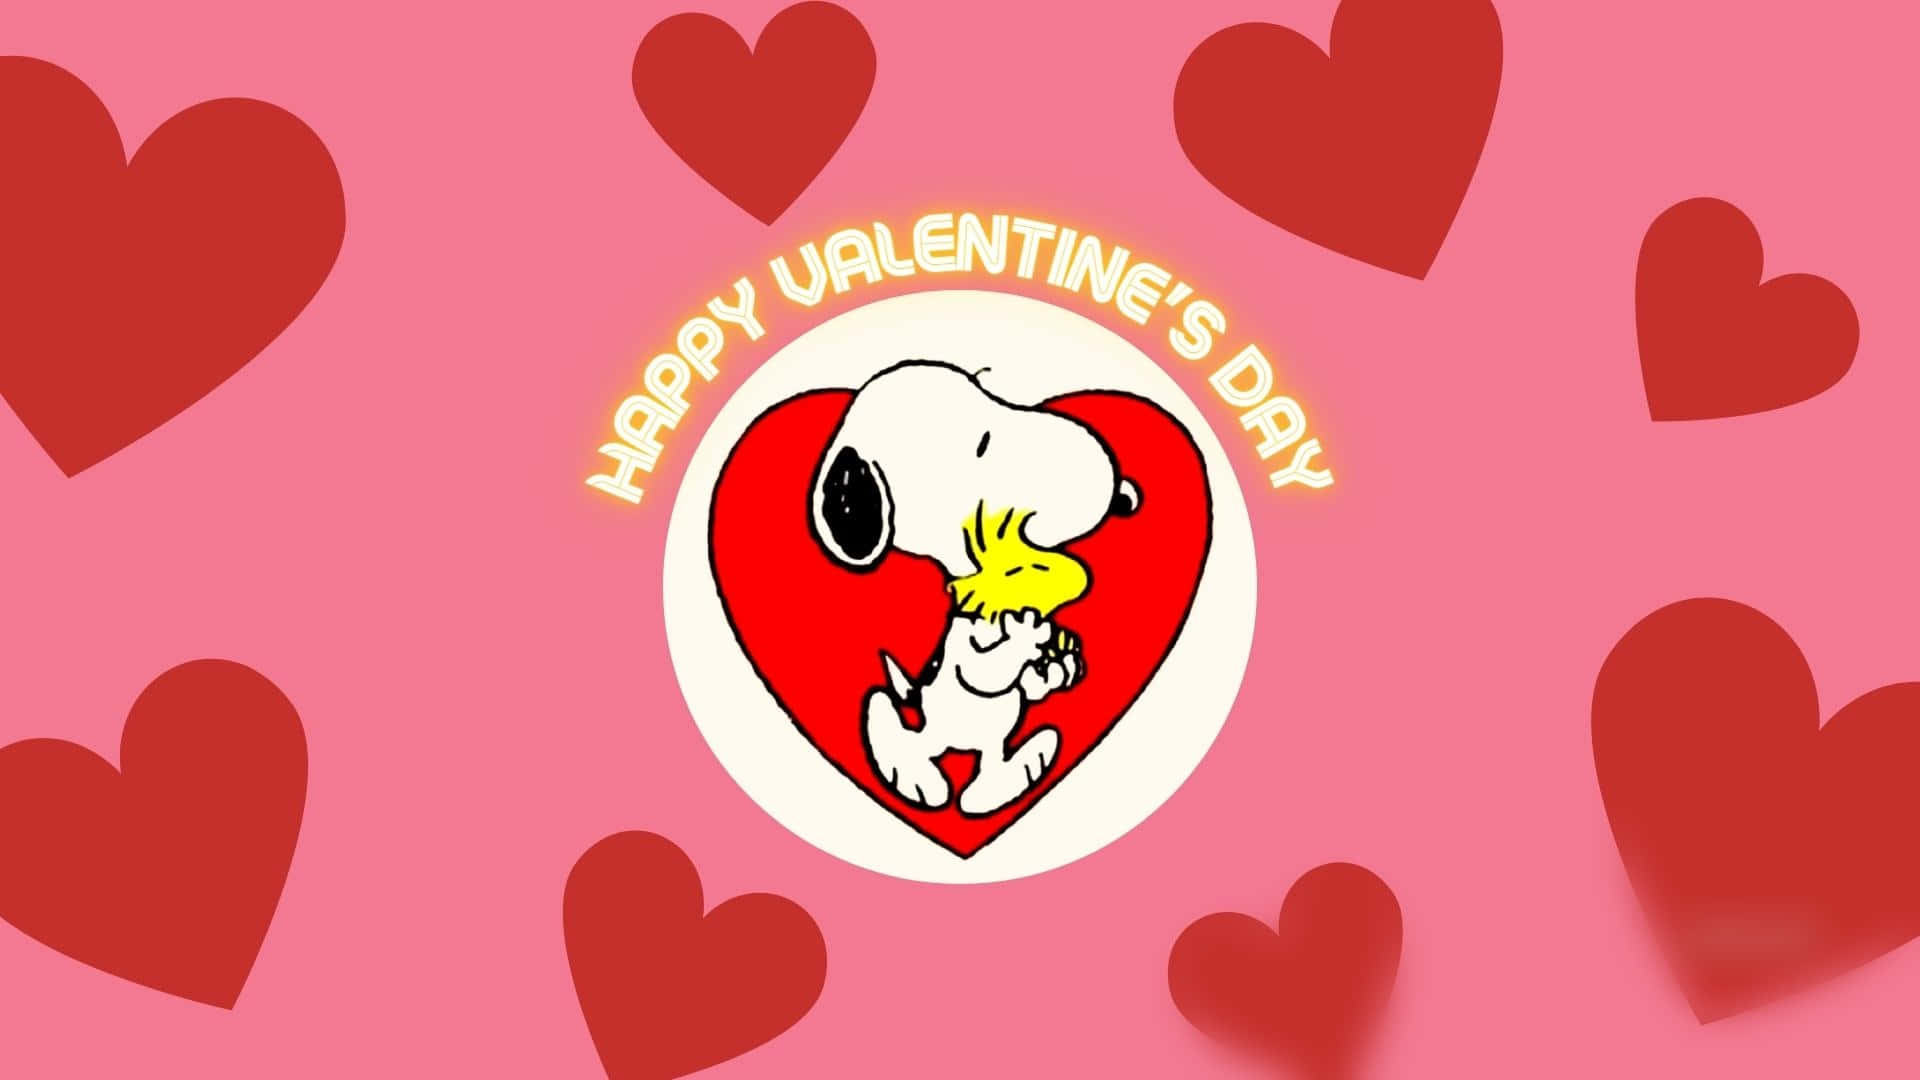 "Love is in the Air with Snoopy" Wallpaper